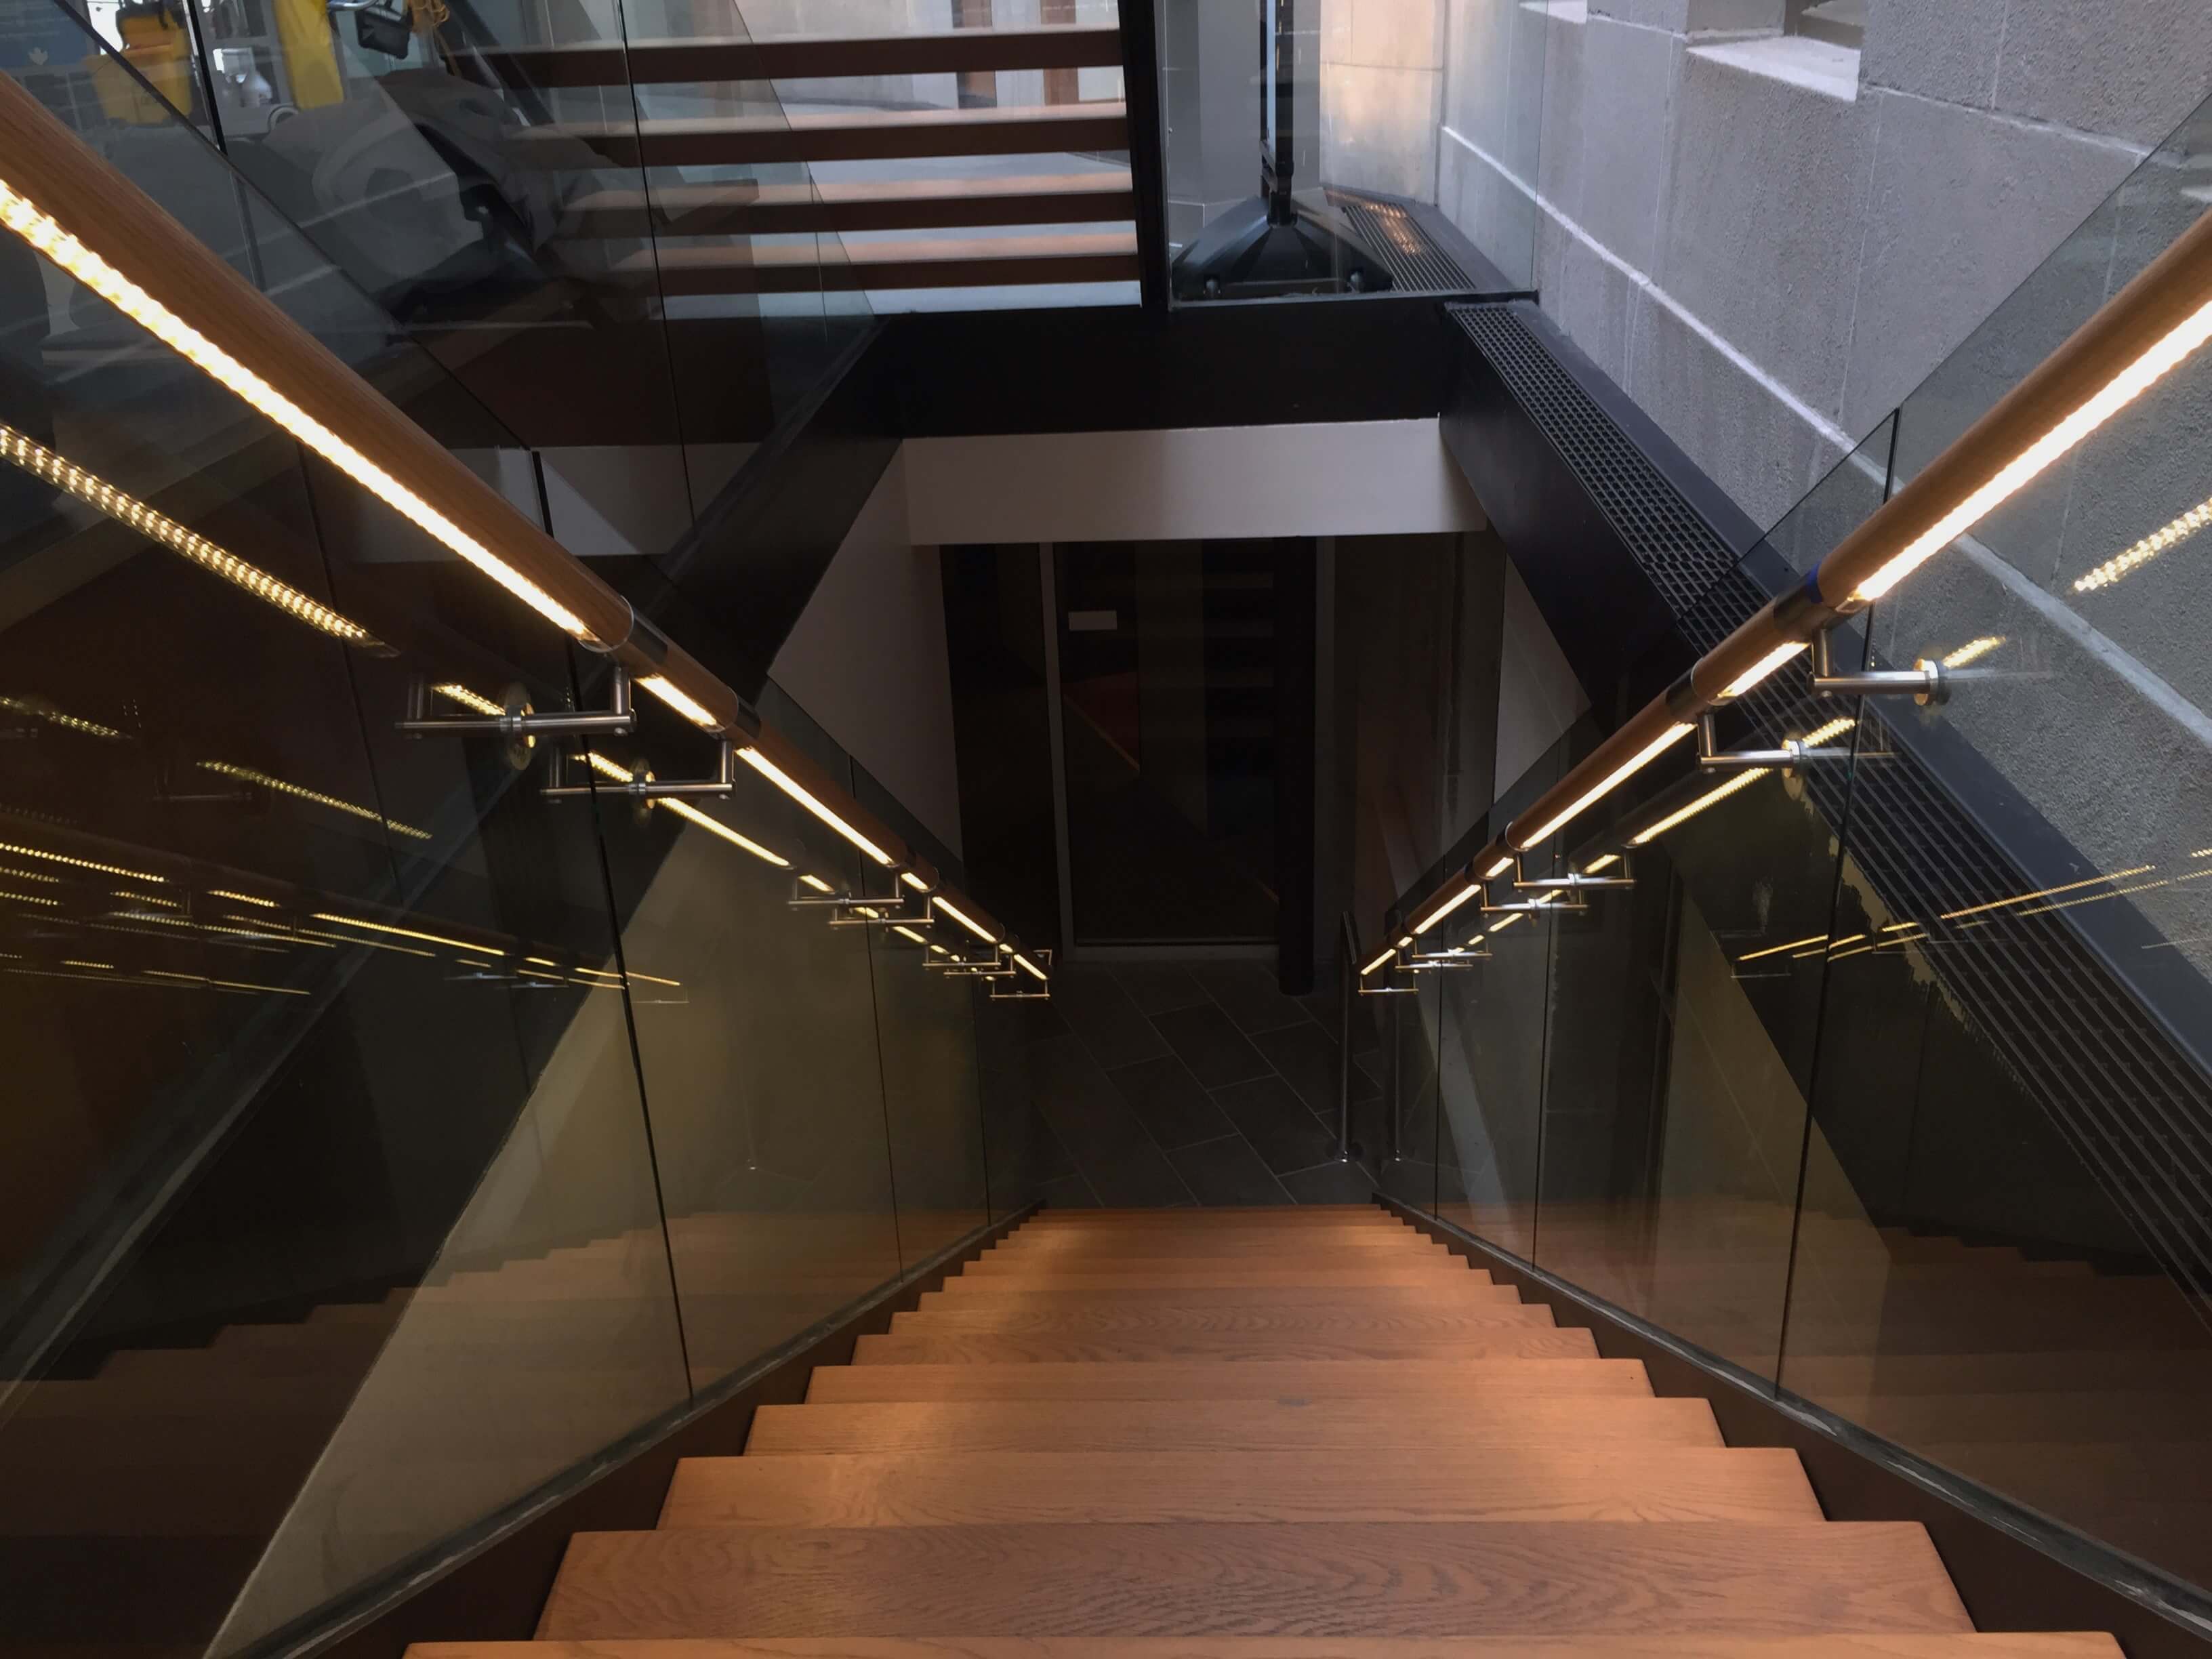 Mt Pleasant Library, DC, Optik Shoe guardrail installation with wood handrail and LED railing